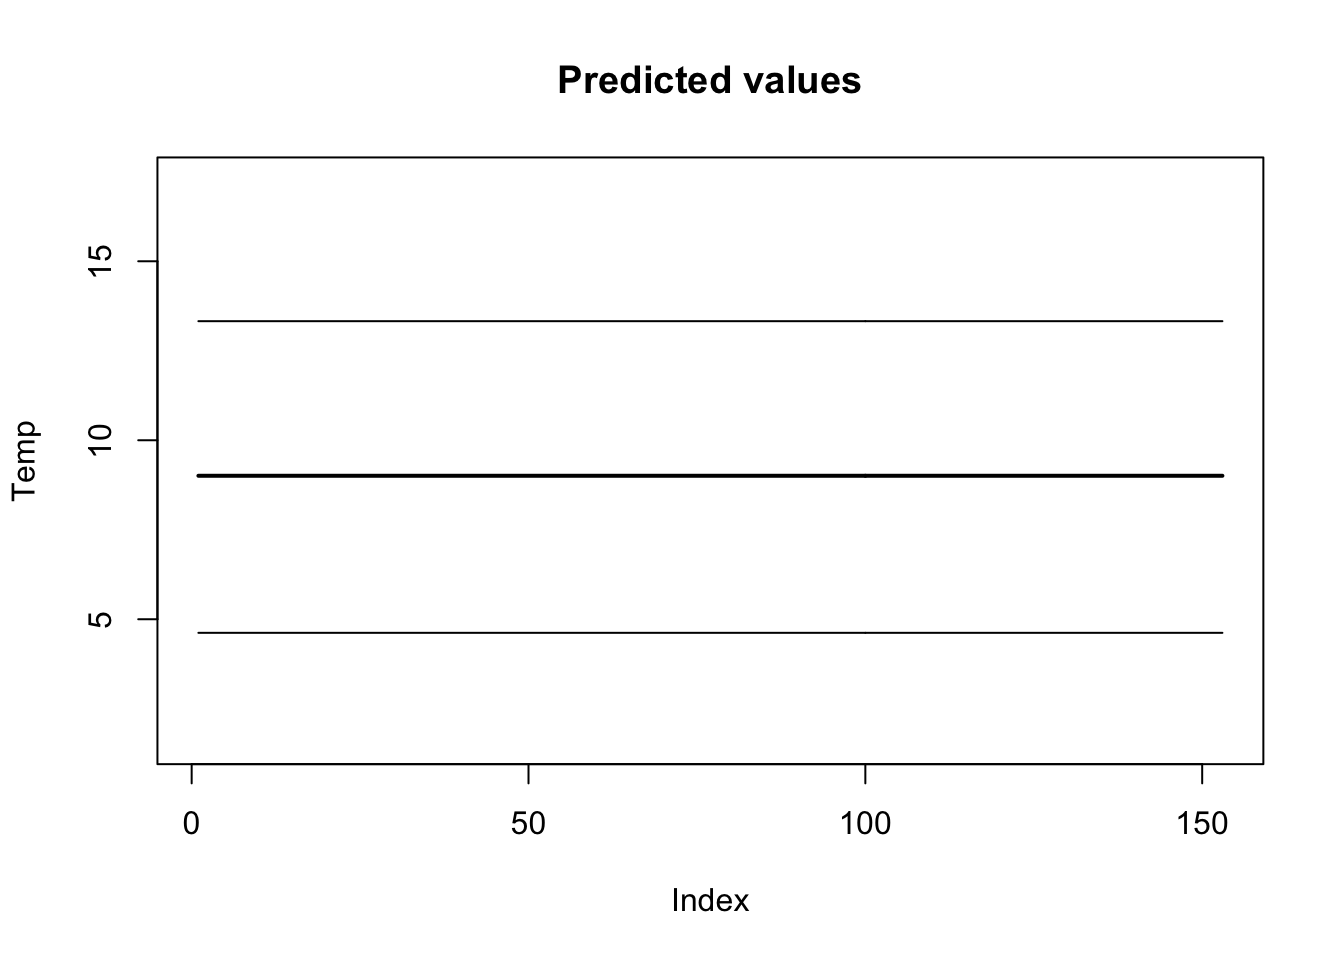 Data and predicted values for the linear regression model.